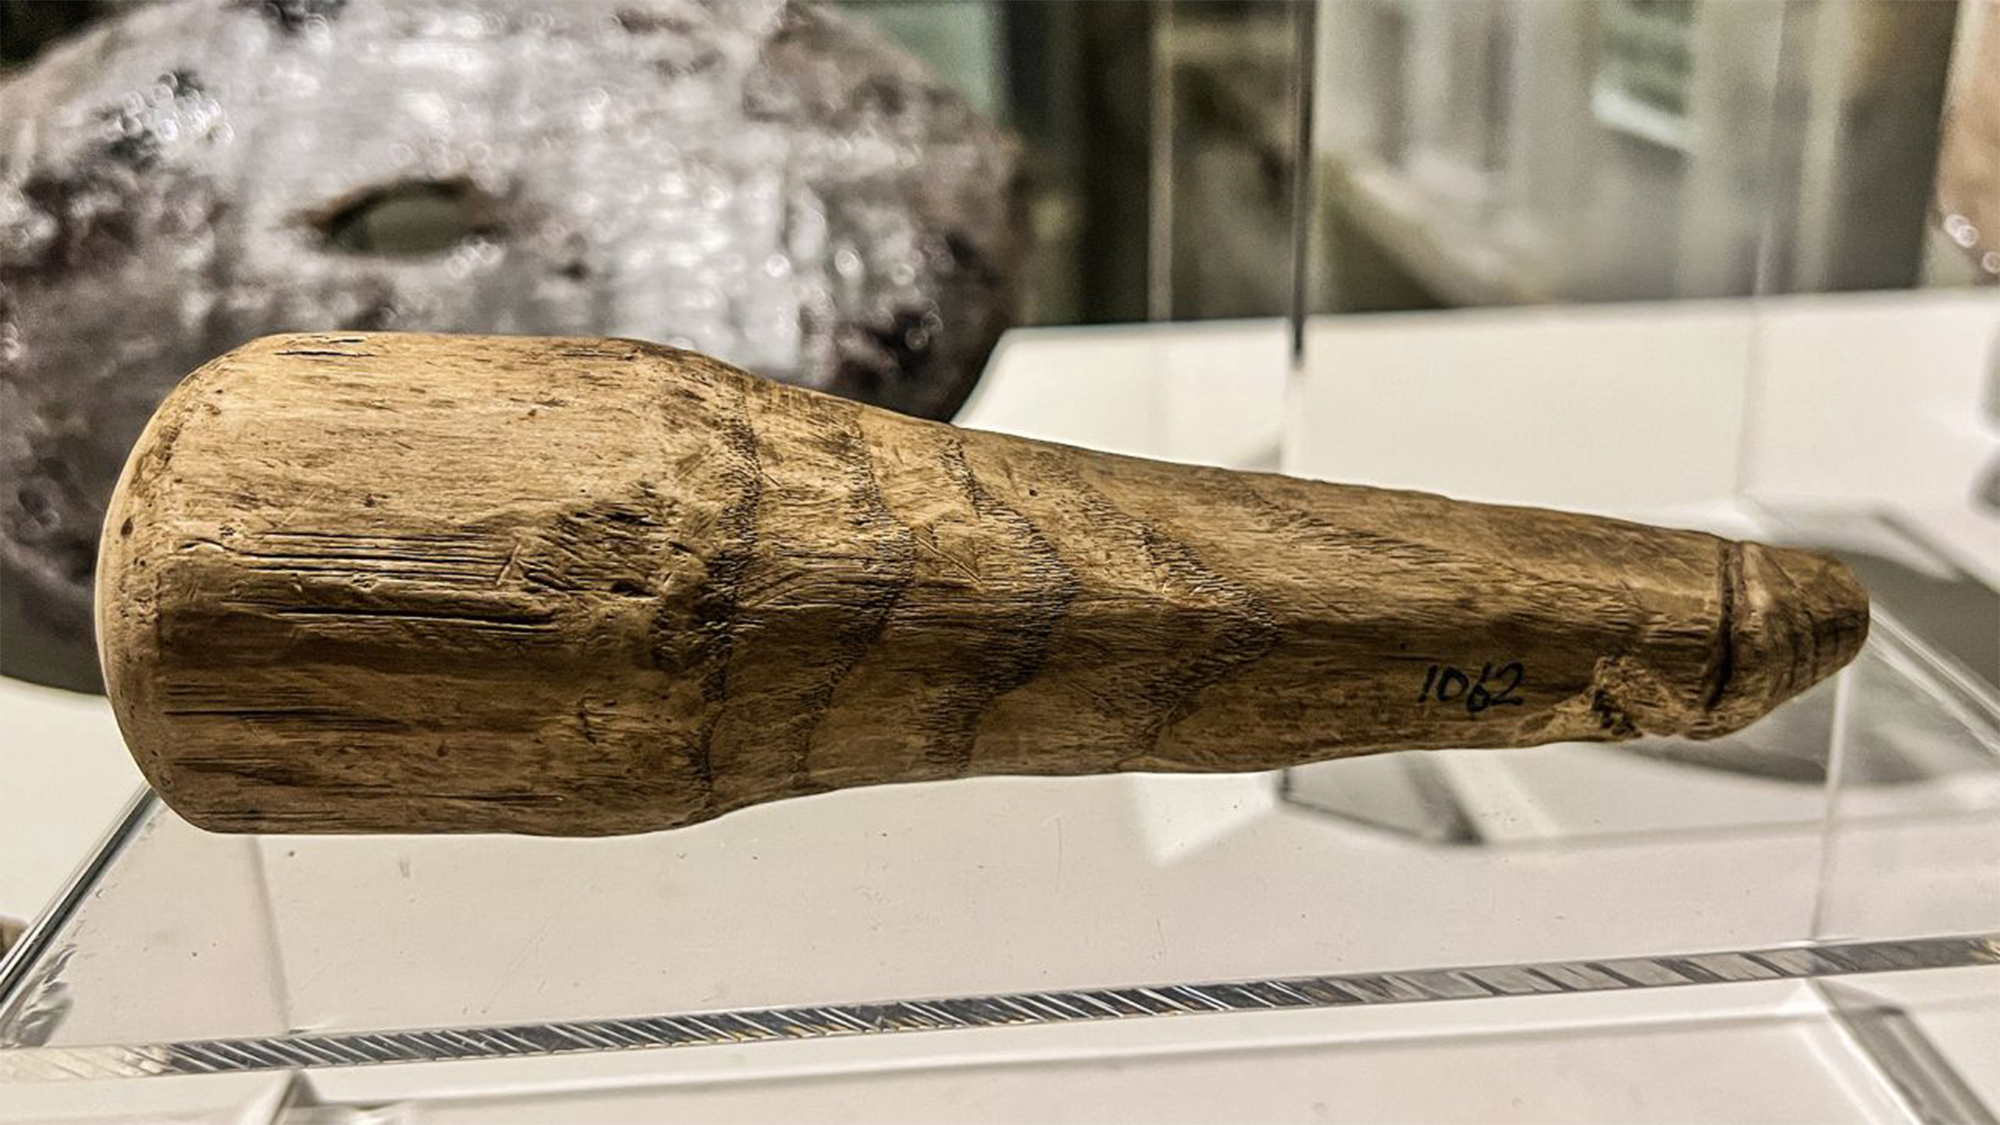 Scientists think they discovered a 2,000-year-old dildo Popular Science